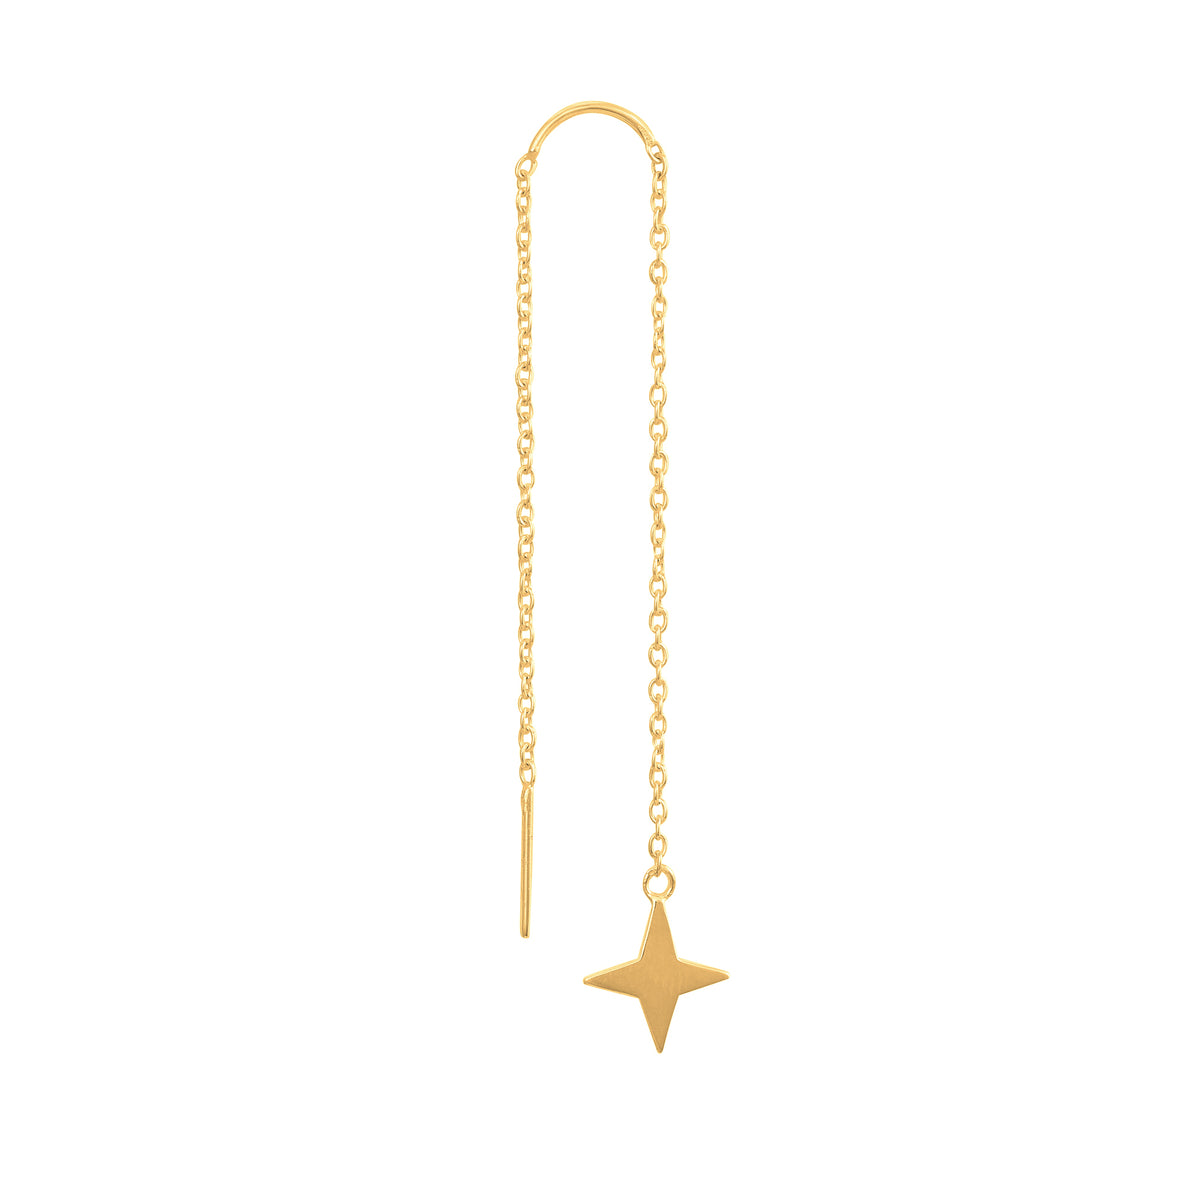 FLOATING STAR EARRINGS gold plated